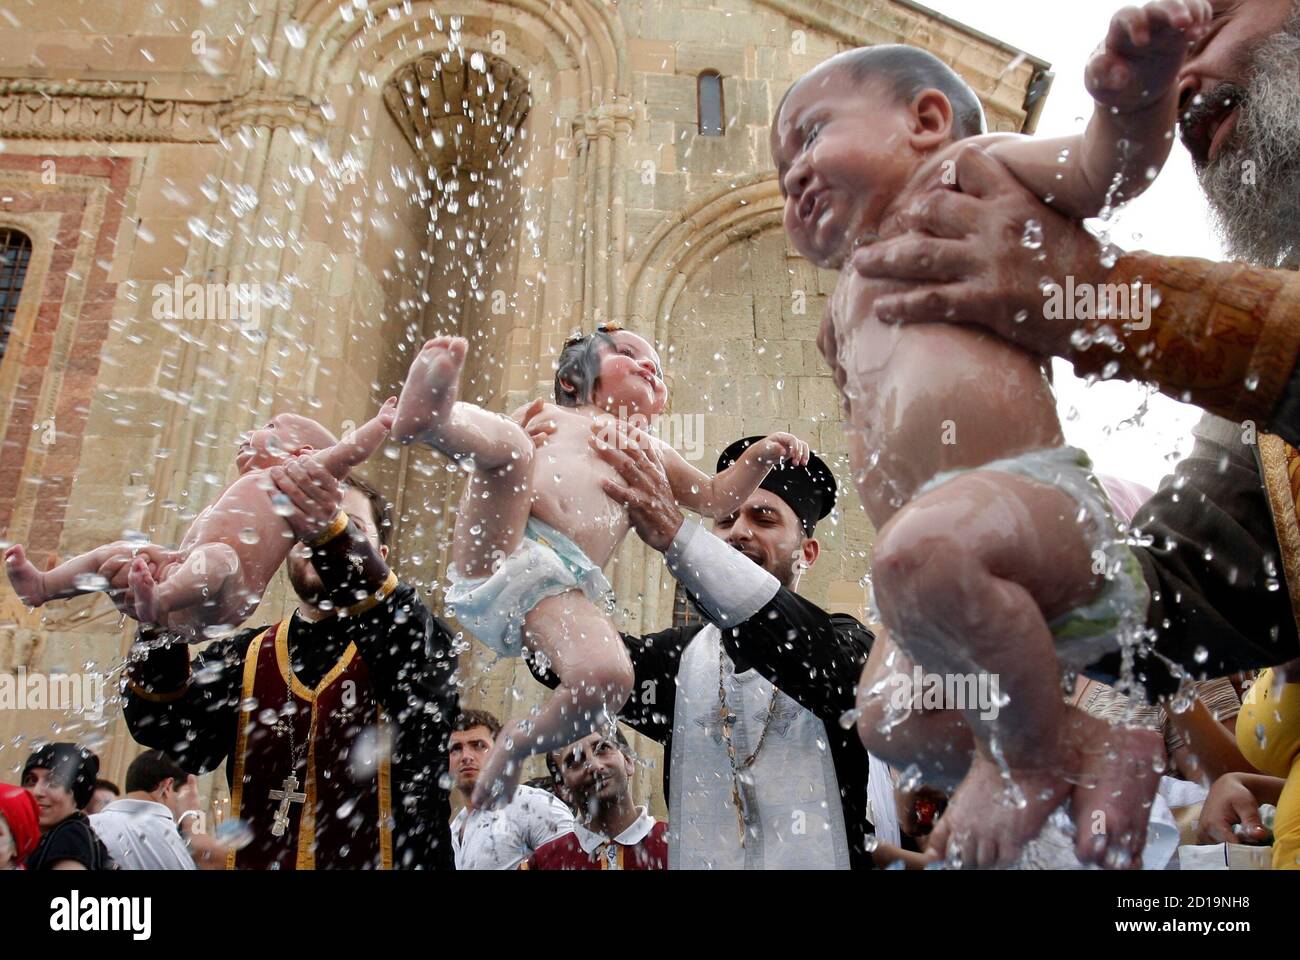 Children are baptized during a mass baptism ceremony in the town of Mtskheta outside Tbilisi, July 13, 2010. About 700 children were baptized by the Georgian Orthodox church during the 12th mass baptism ceremony led by Patriarch Ilia II.  REUTERS/David Mdzinarishvili  (GEORGIA - Tags: RELIGION IMAGES OF THE DAY) Stock Photo